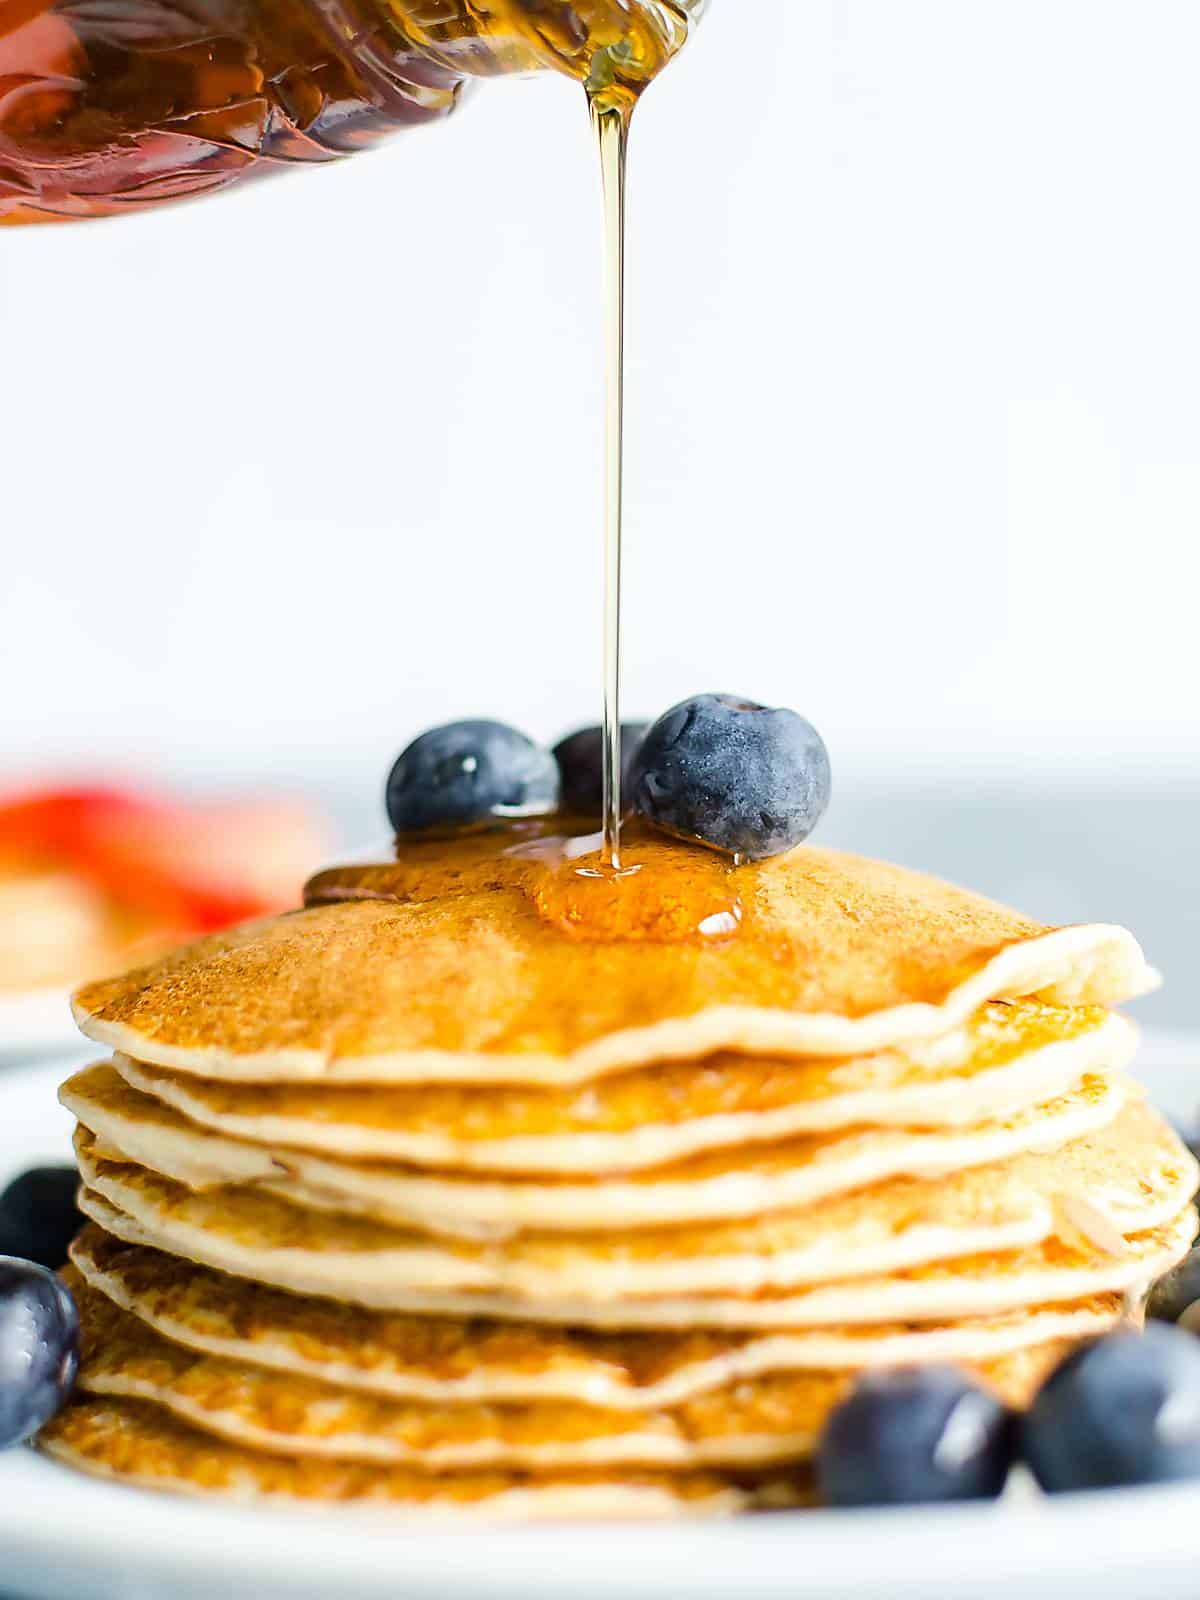 maple syrup being poured over a stack of pancakes garnished with fresh blueberries.